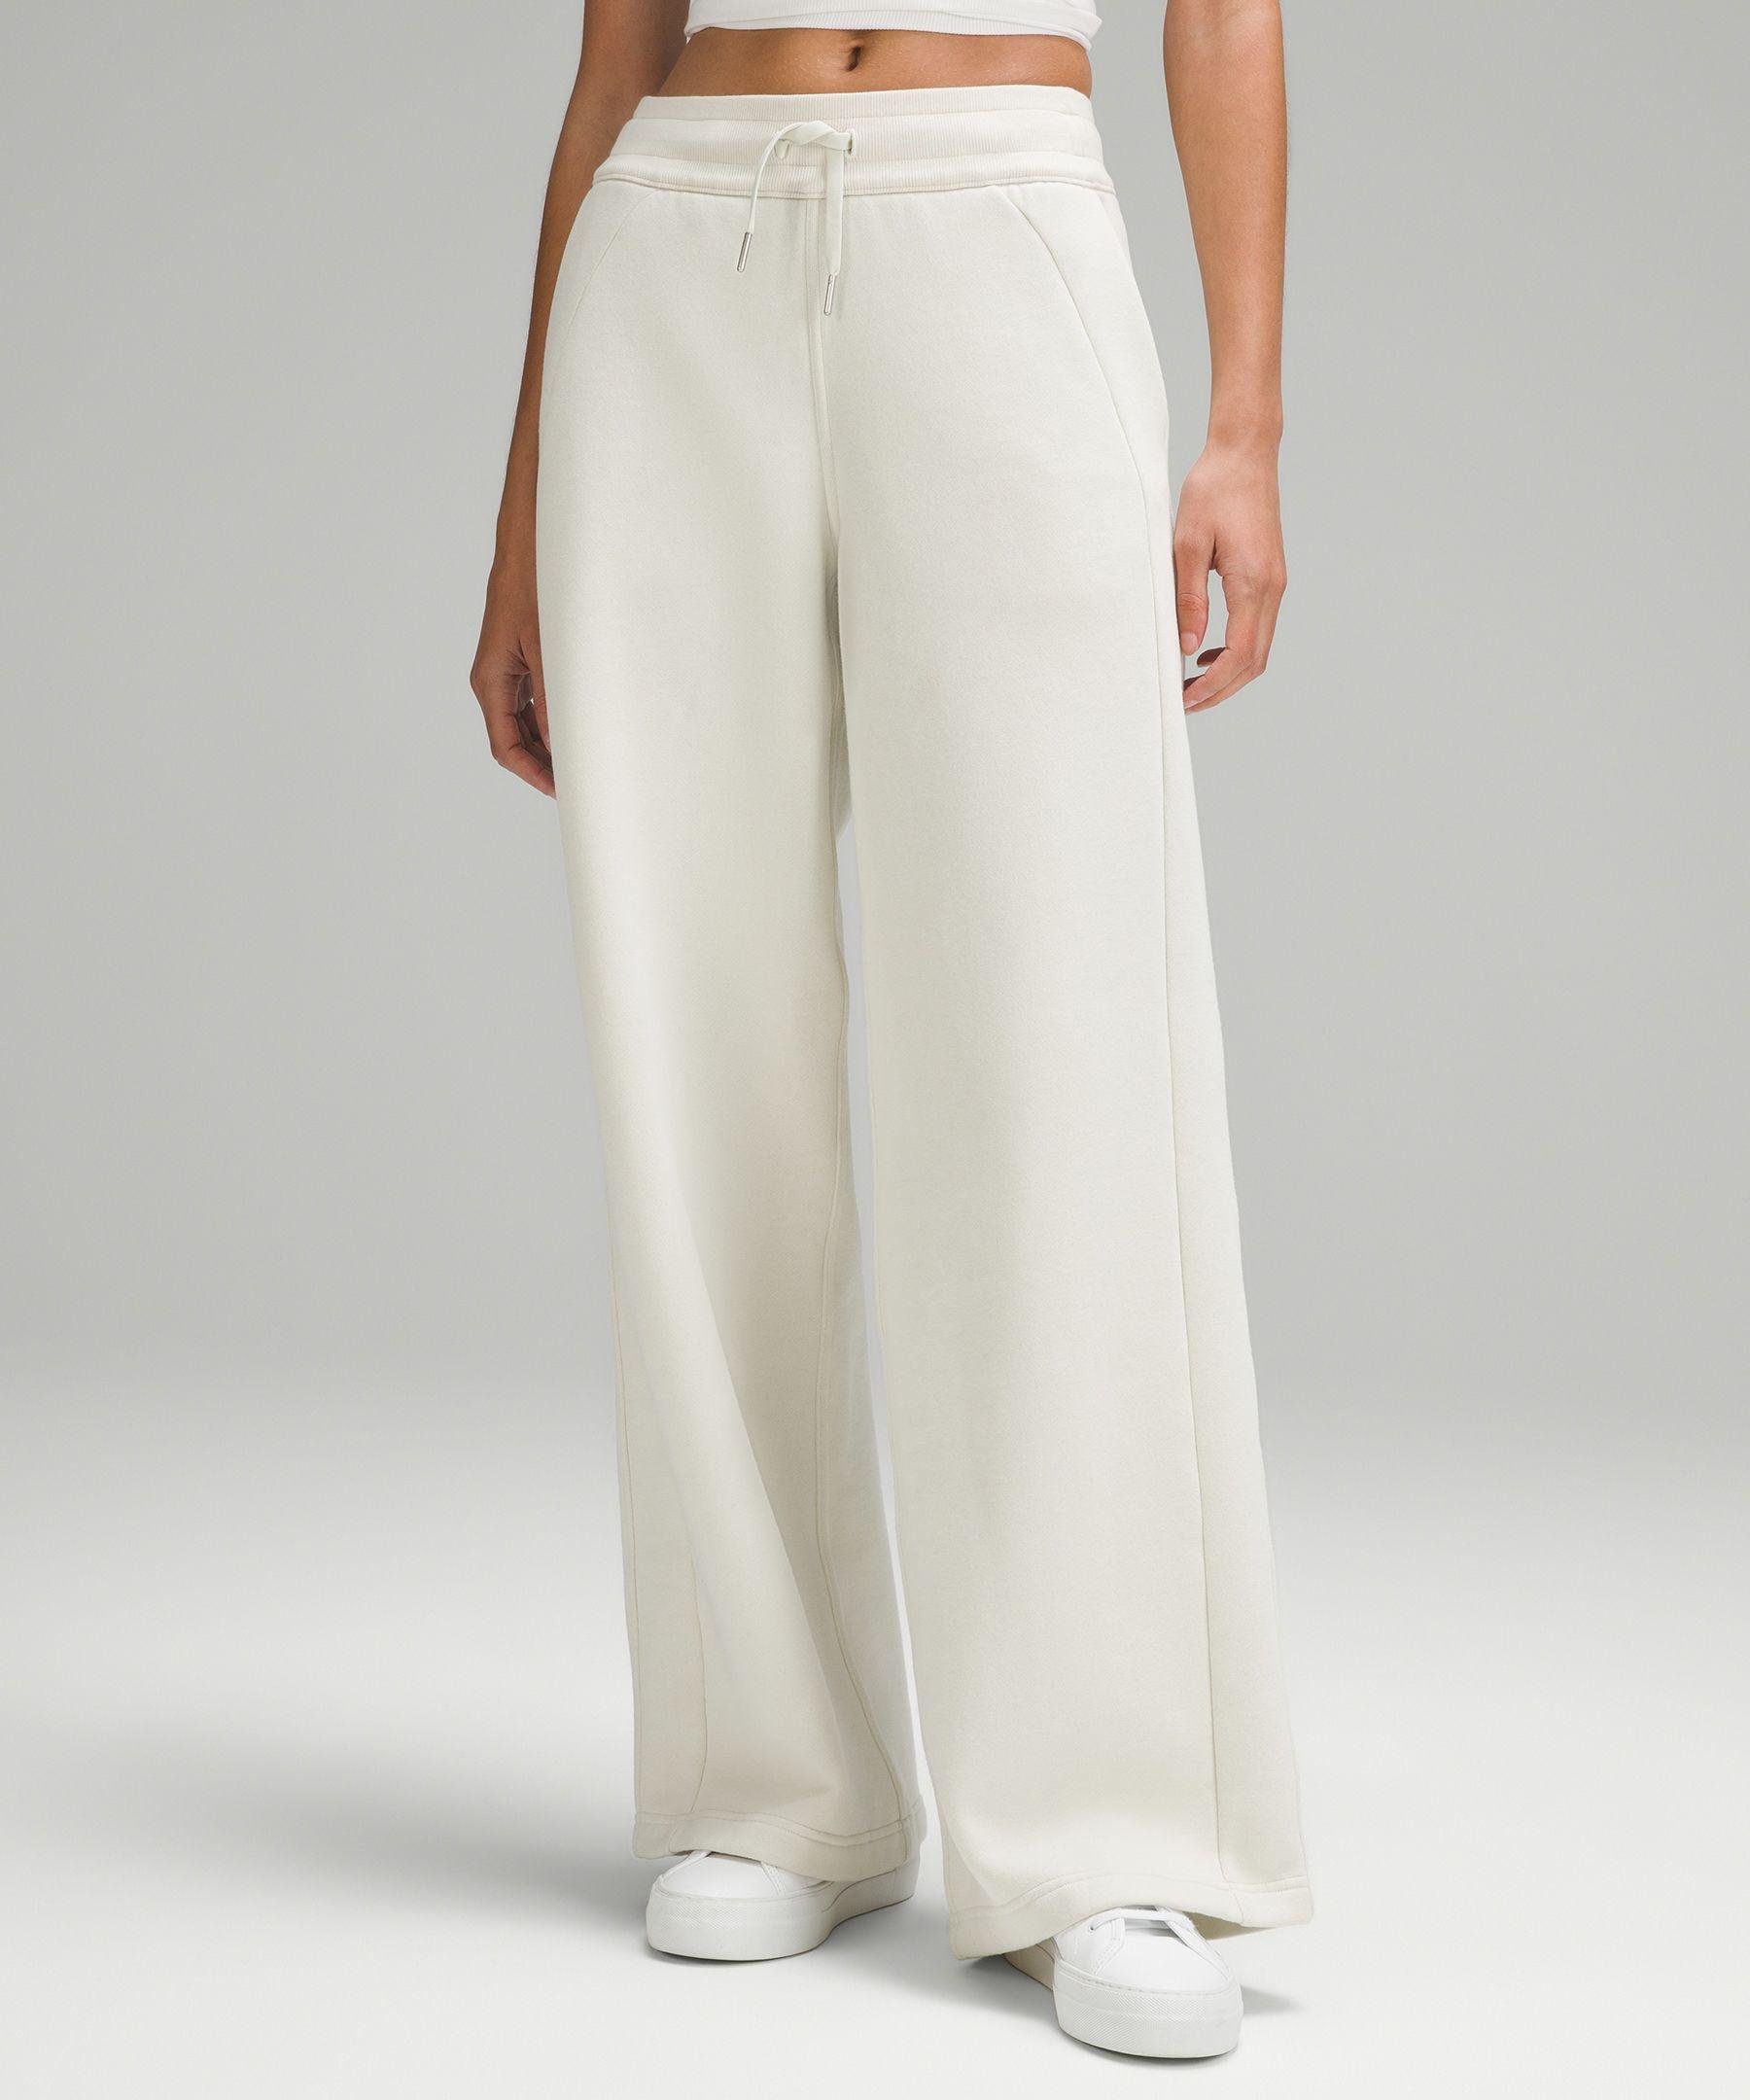 Can the scuba mid rise wide leg pants be hemmed? It's way too long